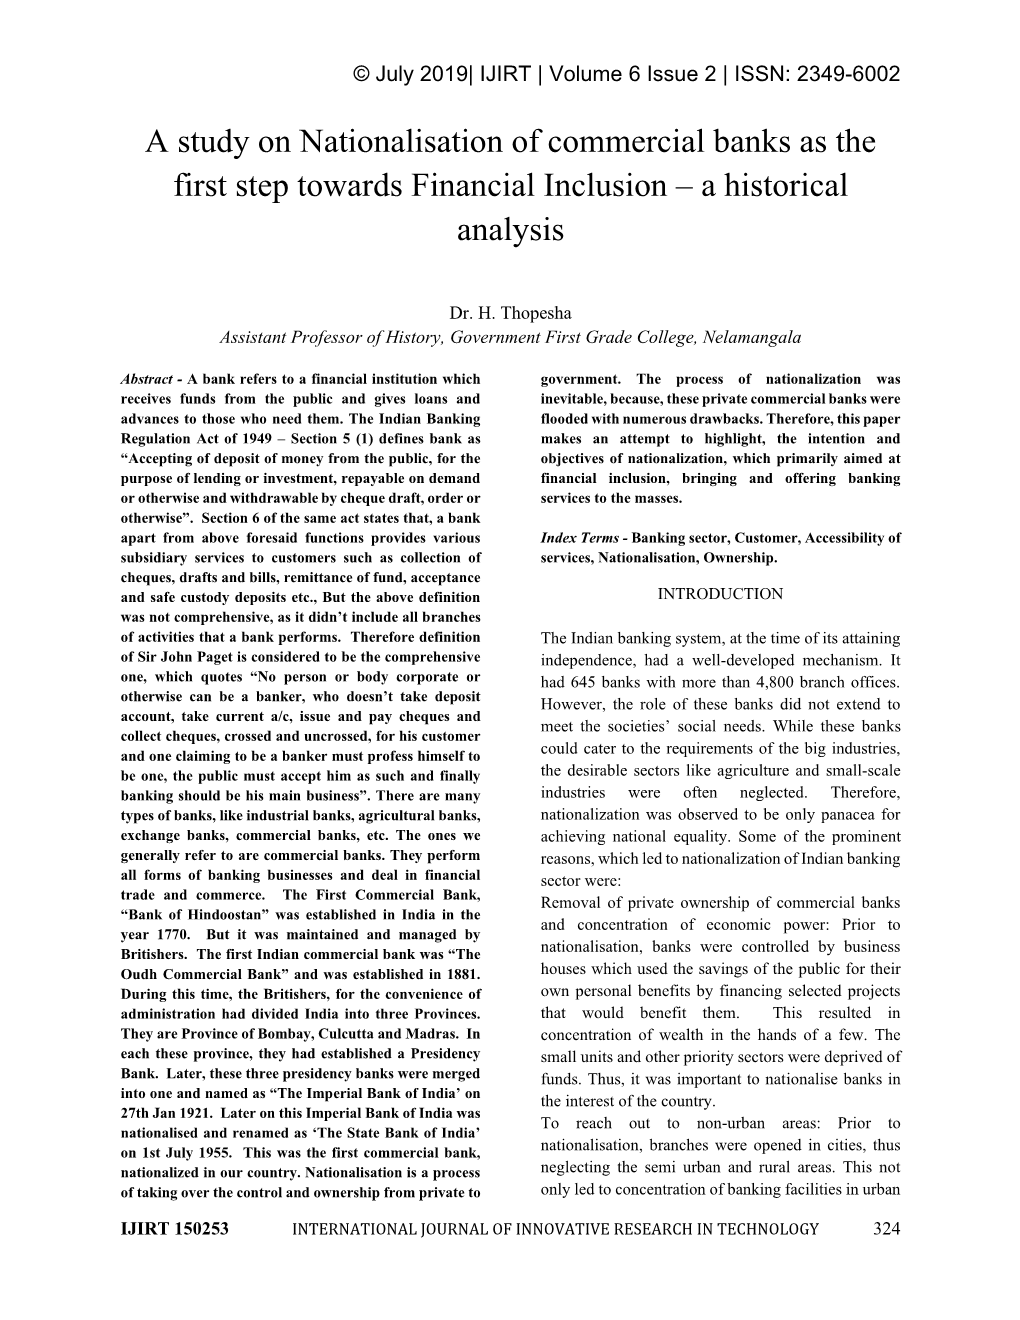 A Study on Nationalisation of Commercial Banks As the First Step Towards Financial Inclusion – a Historical